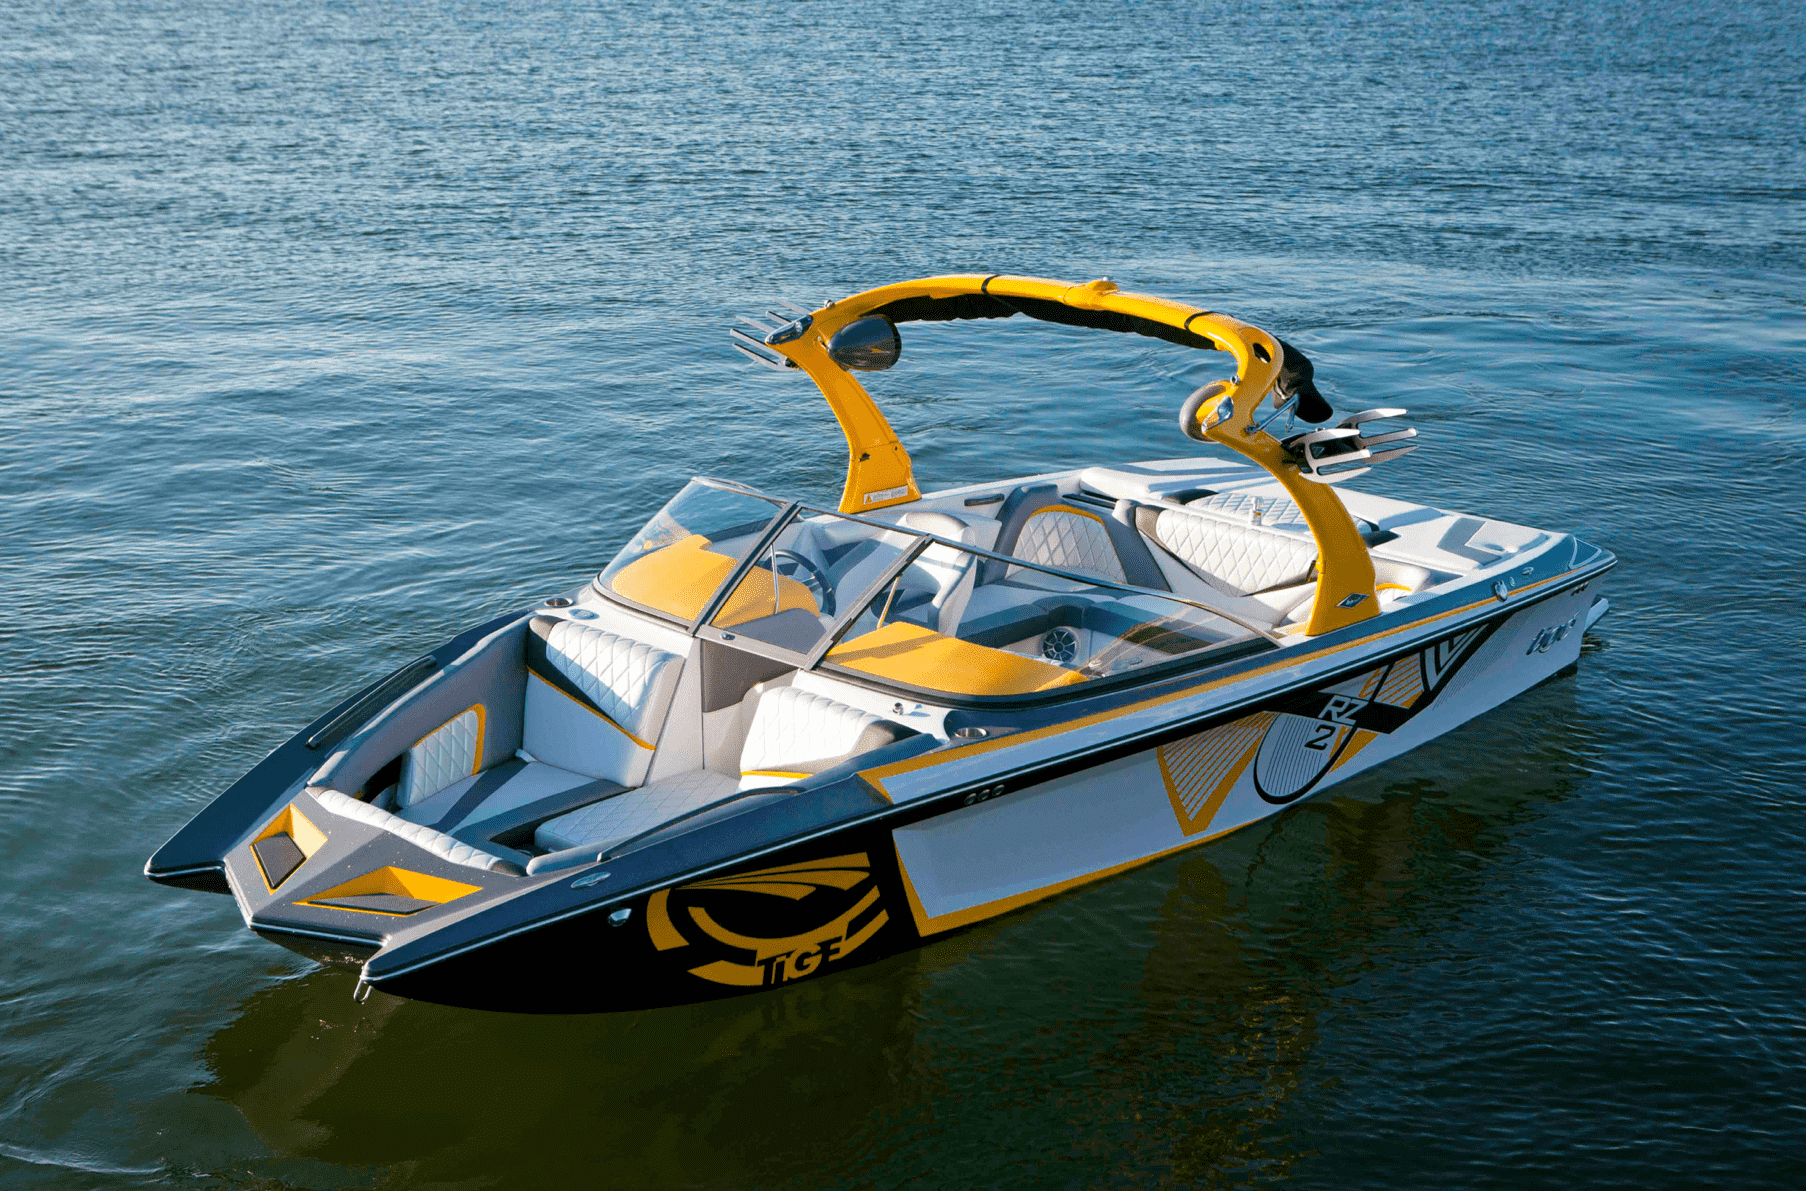 The Tige RZ2 is the best wakeboard boat for you if: You want a mid-size, su...